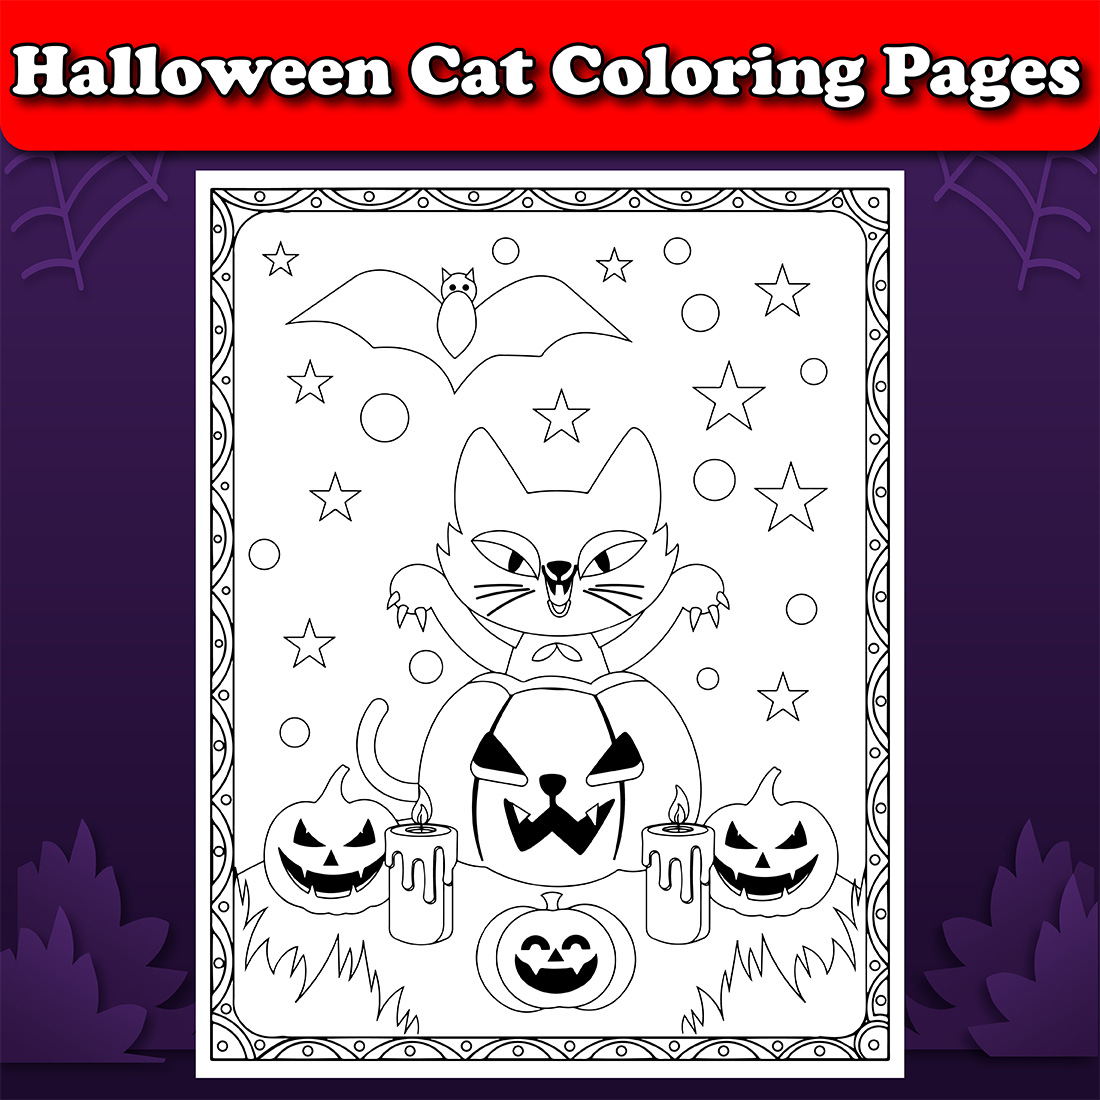 Halloween Cat Coloring Page for Kids